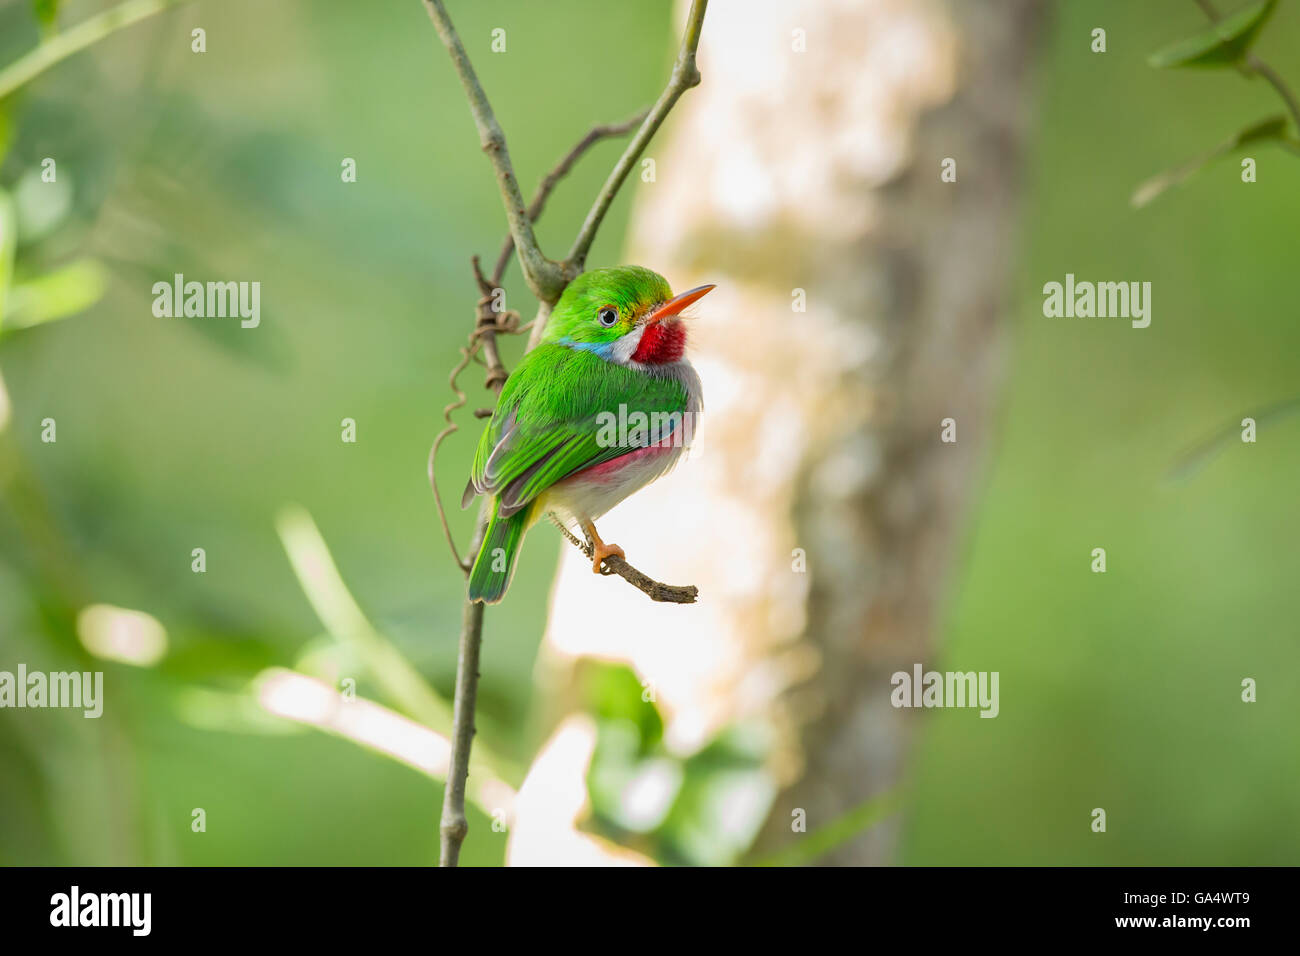 Cuban Tody (Todus multicolor), which is endemic to Cuba, perched on a branch in the Cayo Coco area. Stock Photo